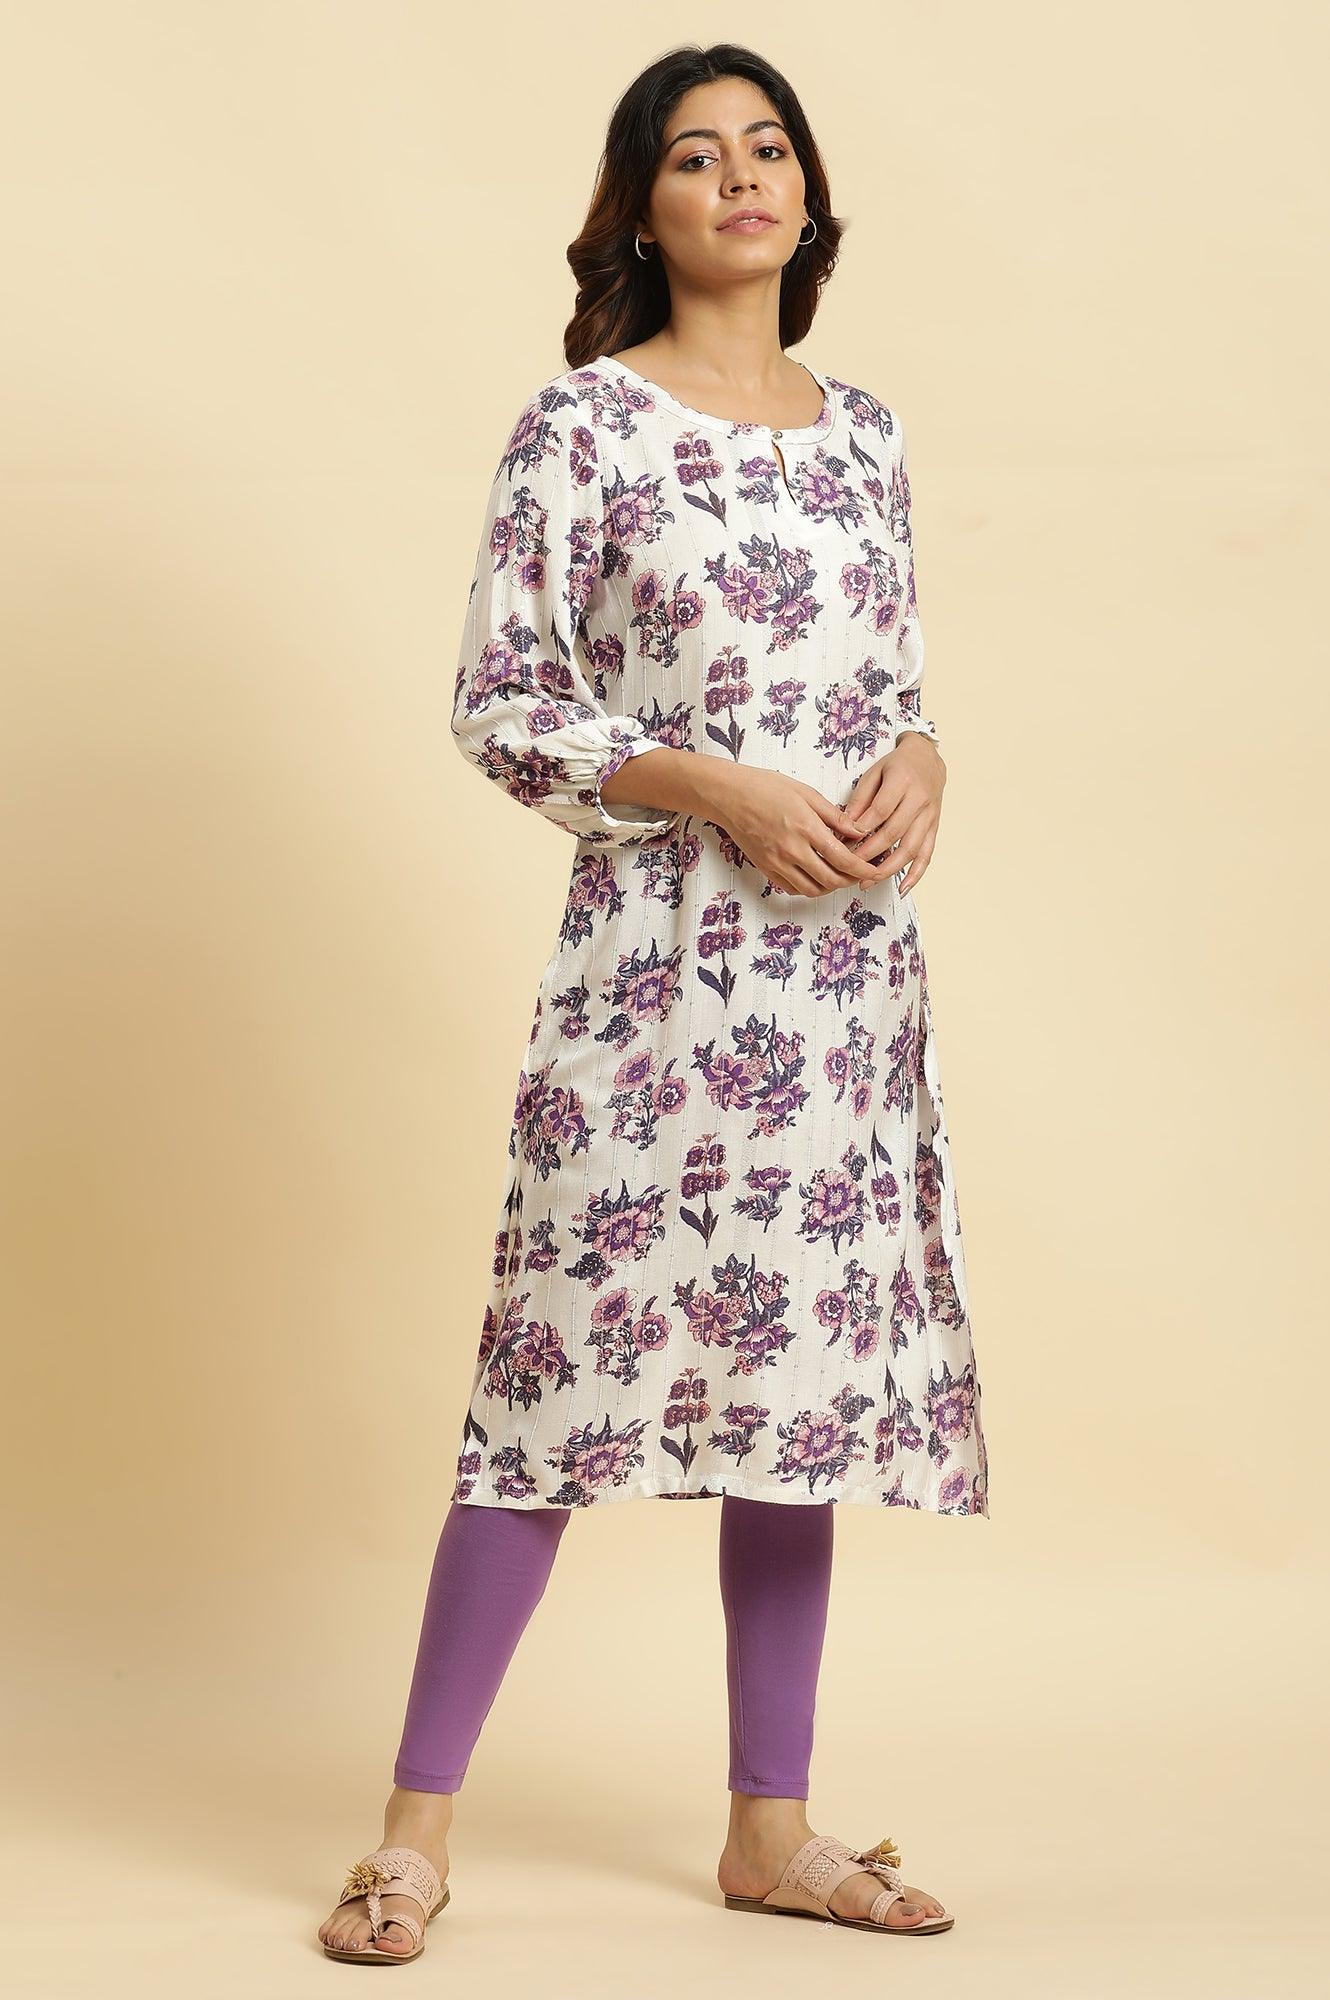 Ecru Relaxed Fit Straight Kurta With Purple Floral Print - wforwoman